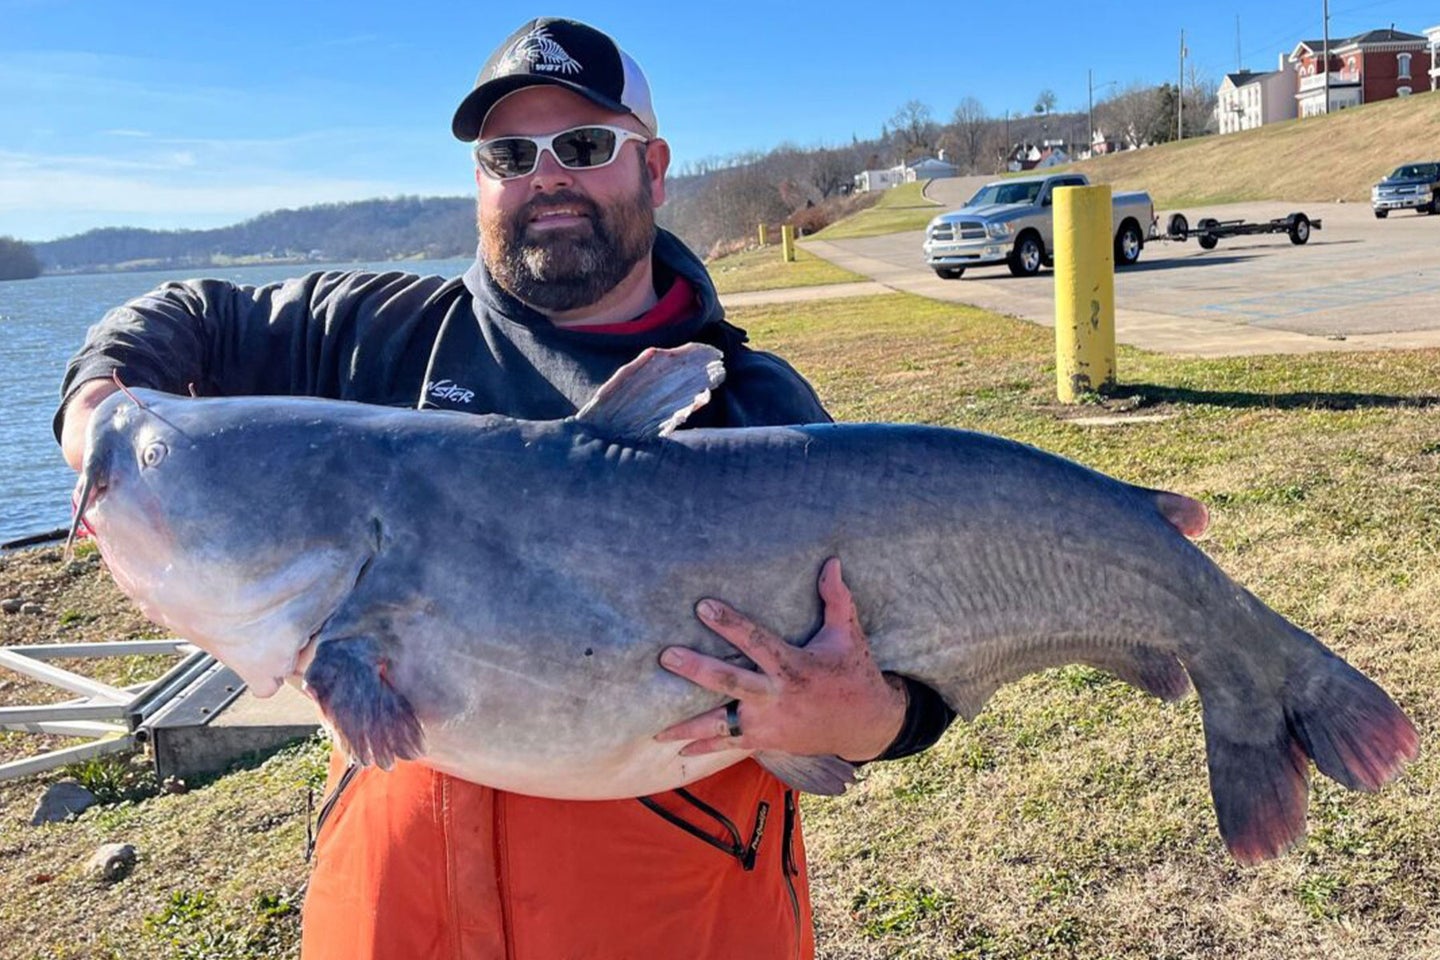 A West Virginia angler poses with a record-breaking blue catfish caught in the Ohio River.